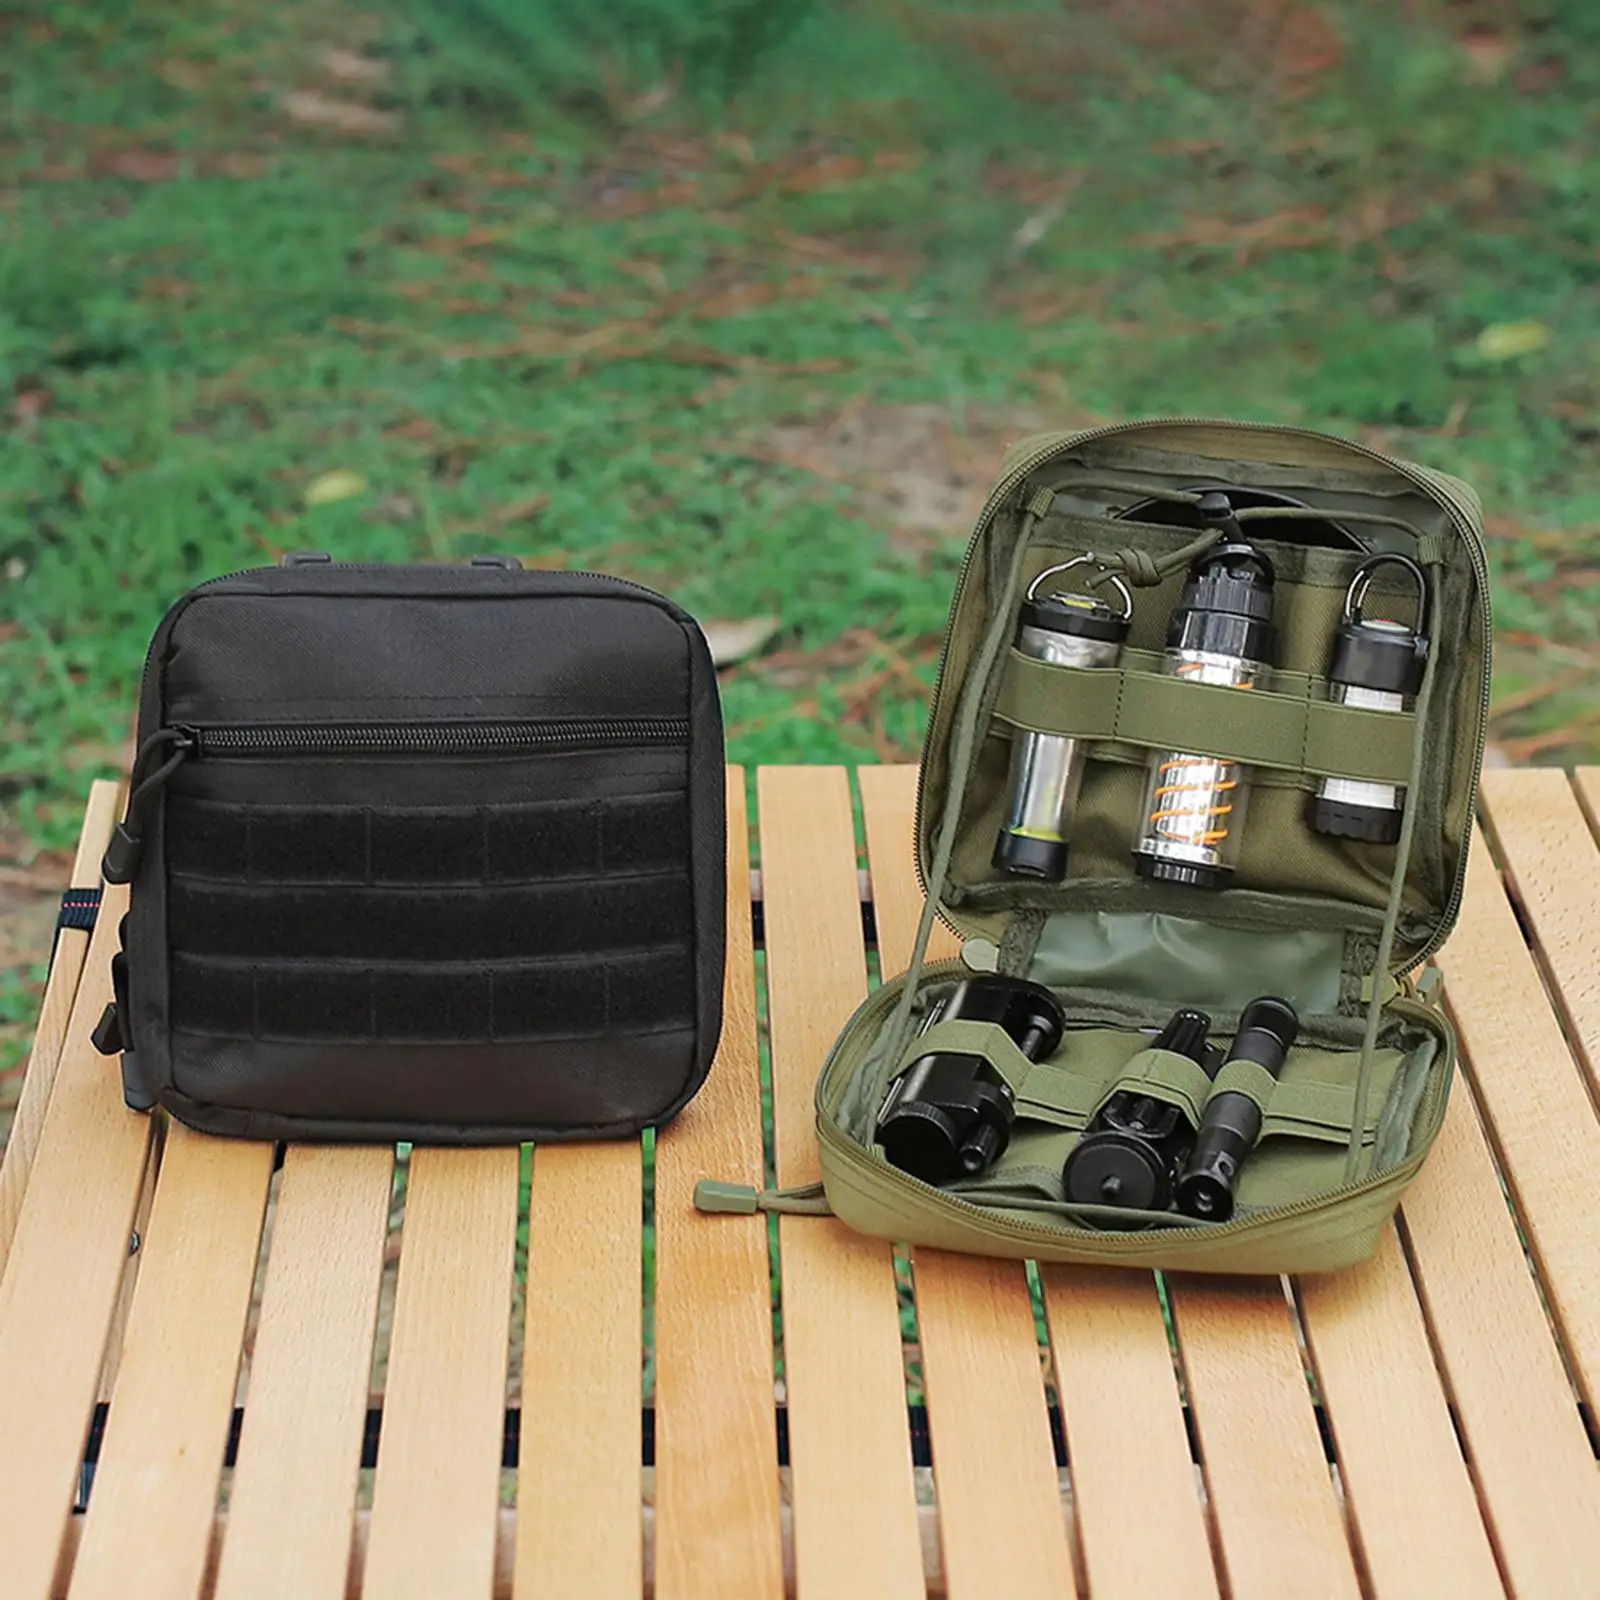 Camping Lantern Storage Bag Pouch Zipper Easily to Carry Portable Tent Light